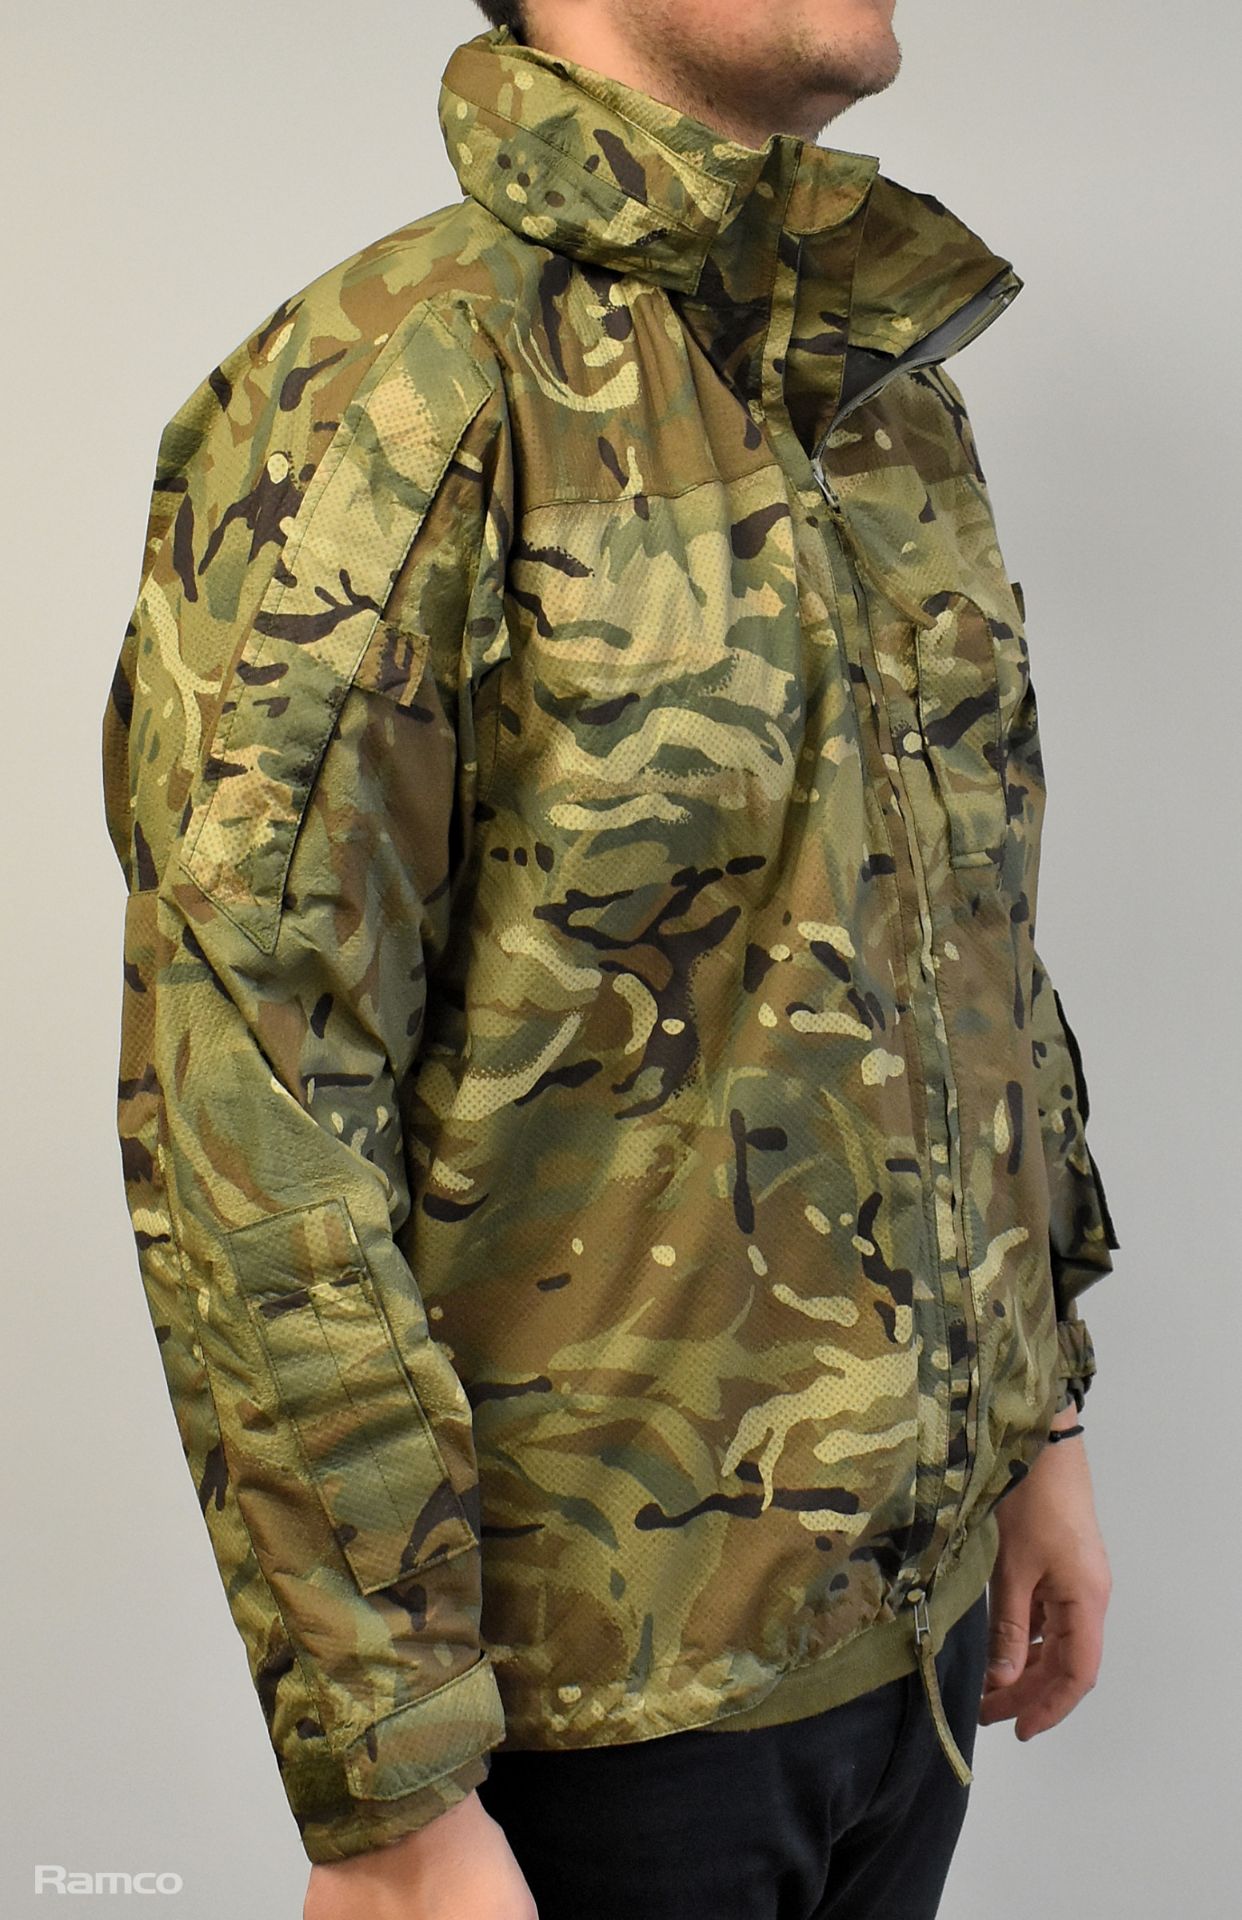 80x British Army MTP waterproof lightweight jackets - mixed grades and sizes - Image 4 of 11